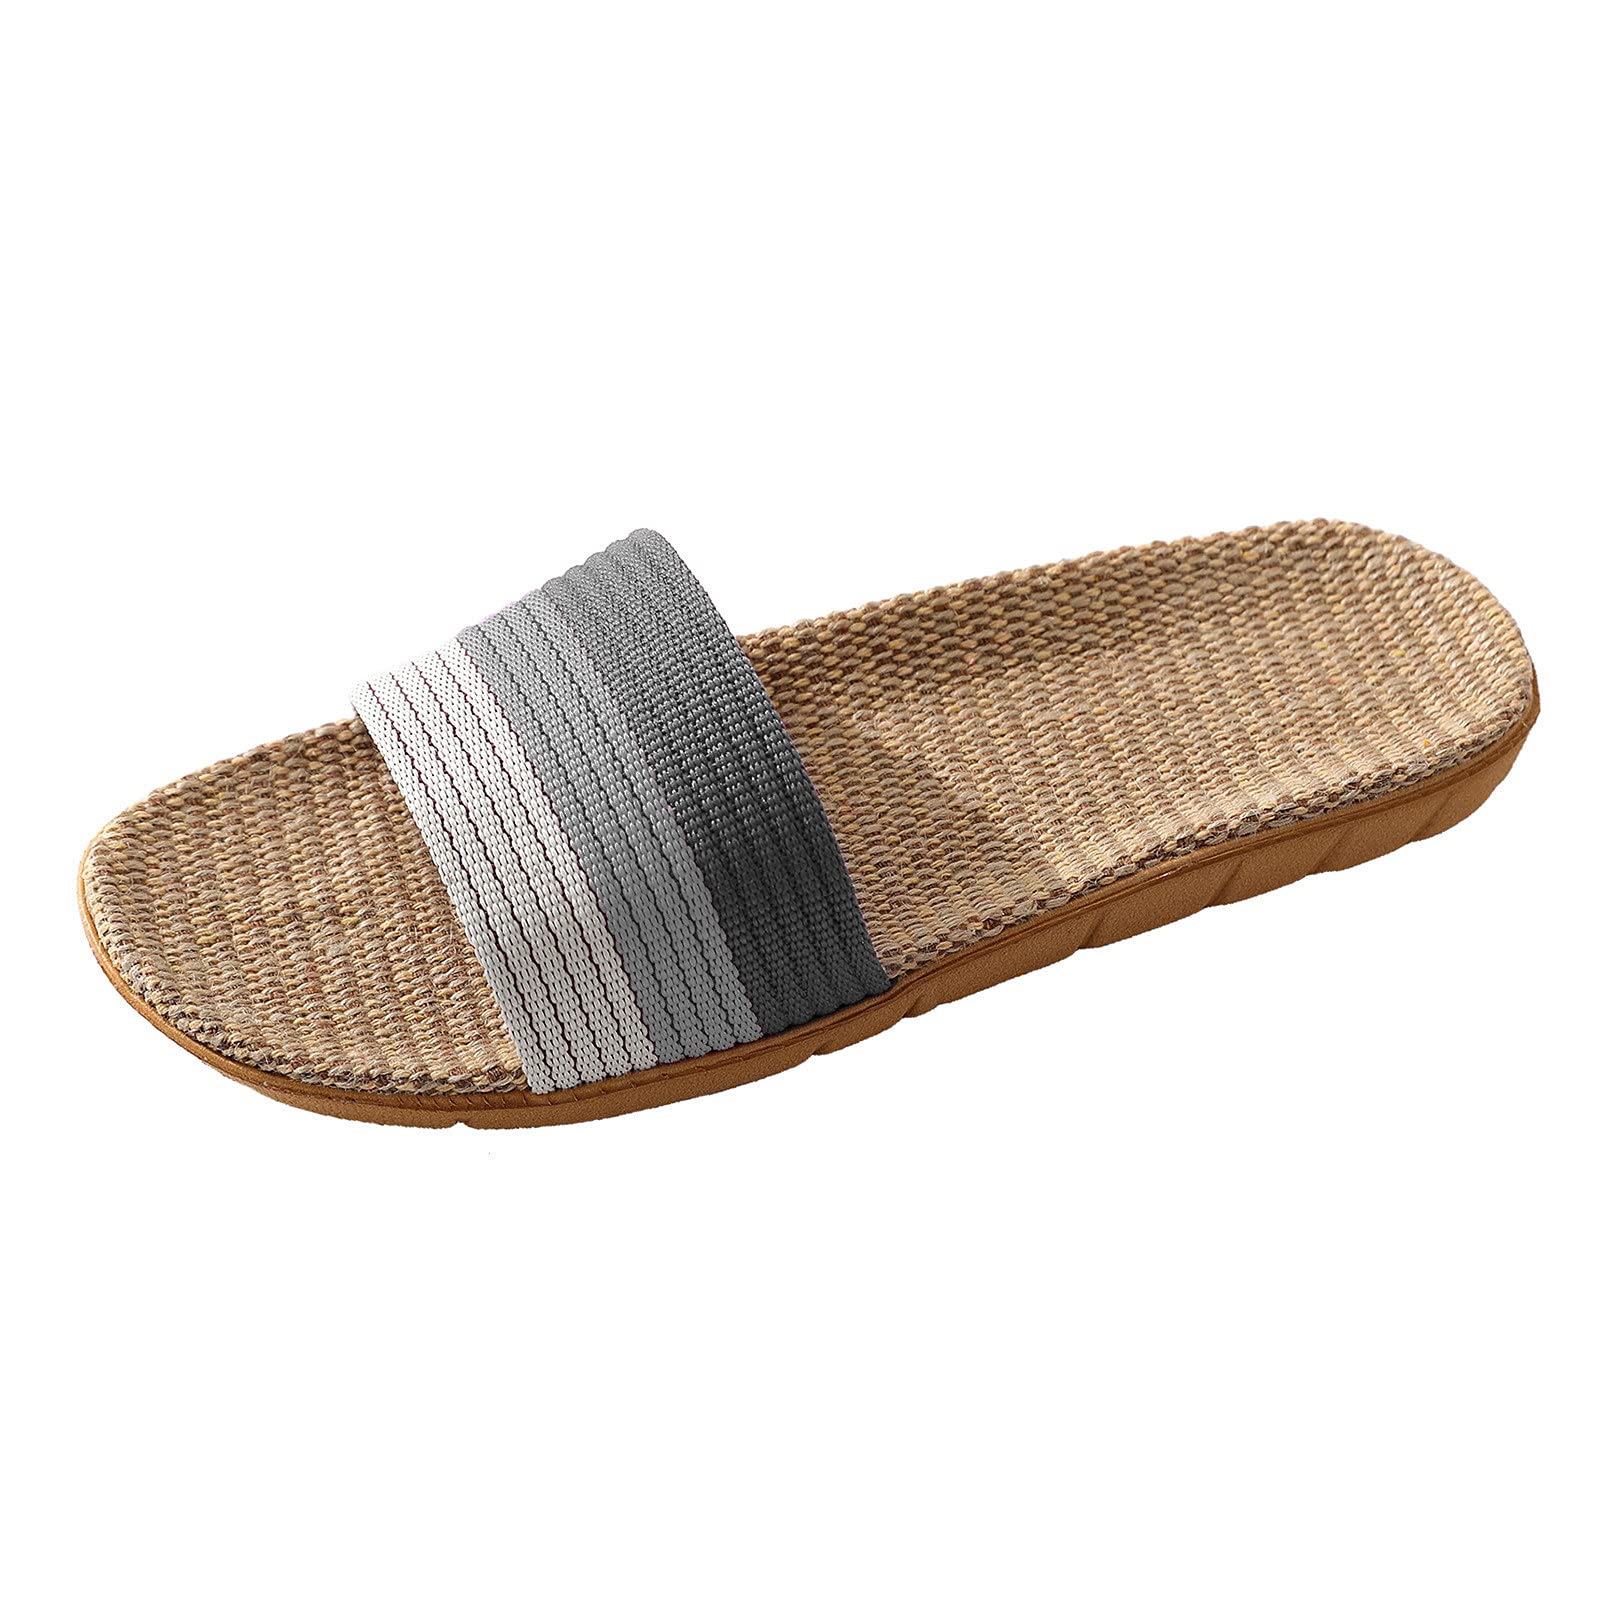 Mens Slippers 12 New Stripe Flat Slides Indoor Home Slippers Causal Fashion Comfortable Beach Men Bed Slippers